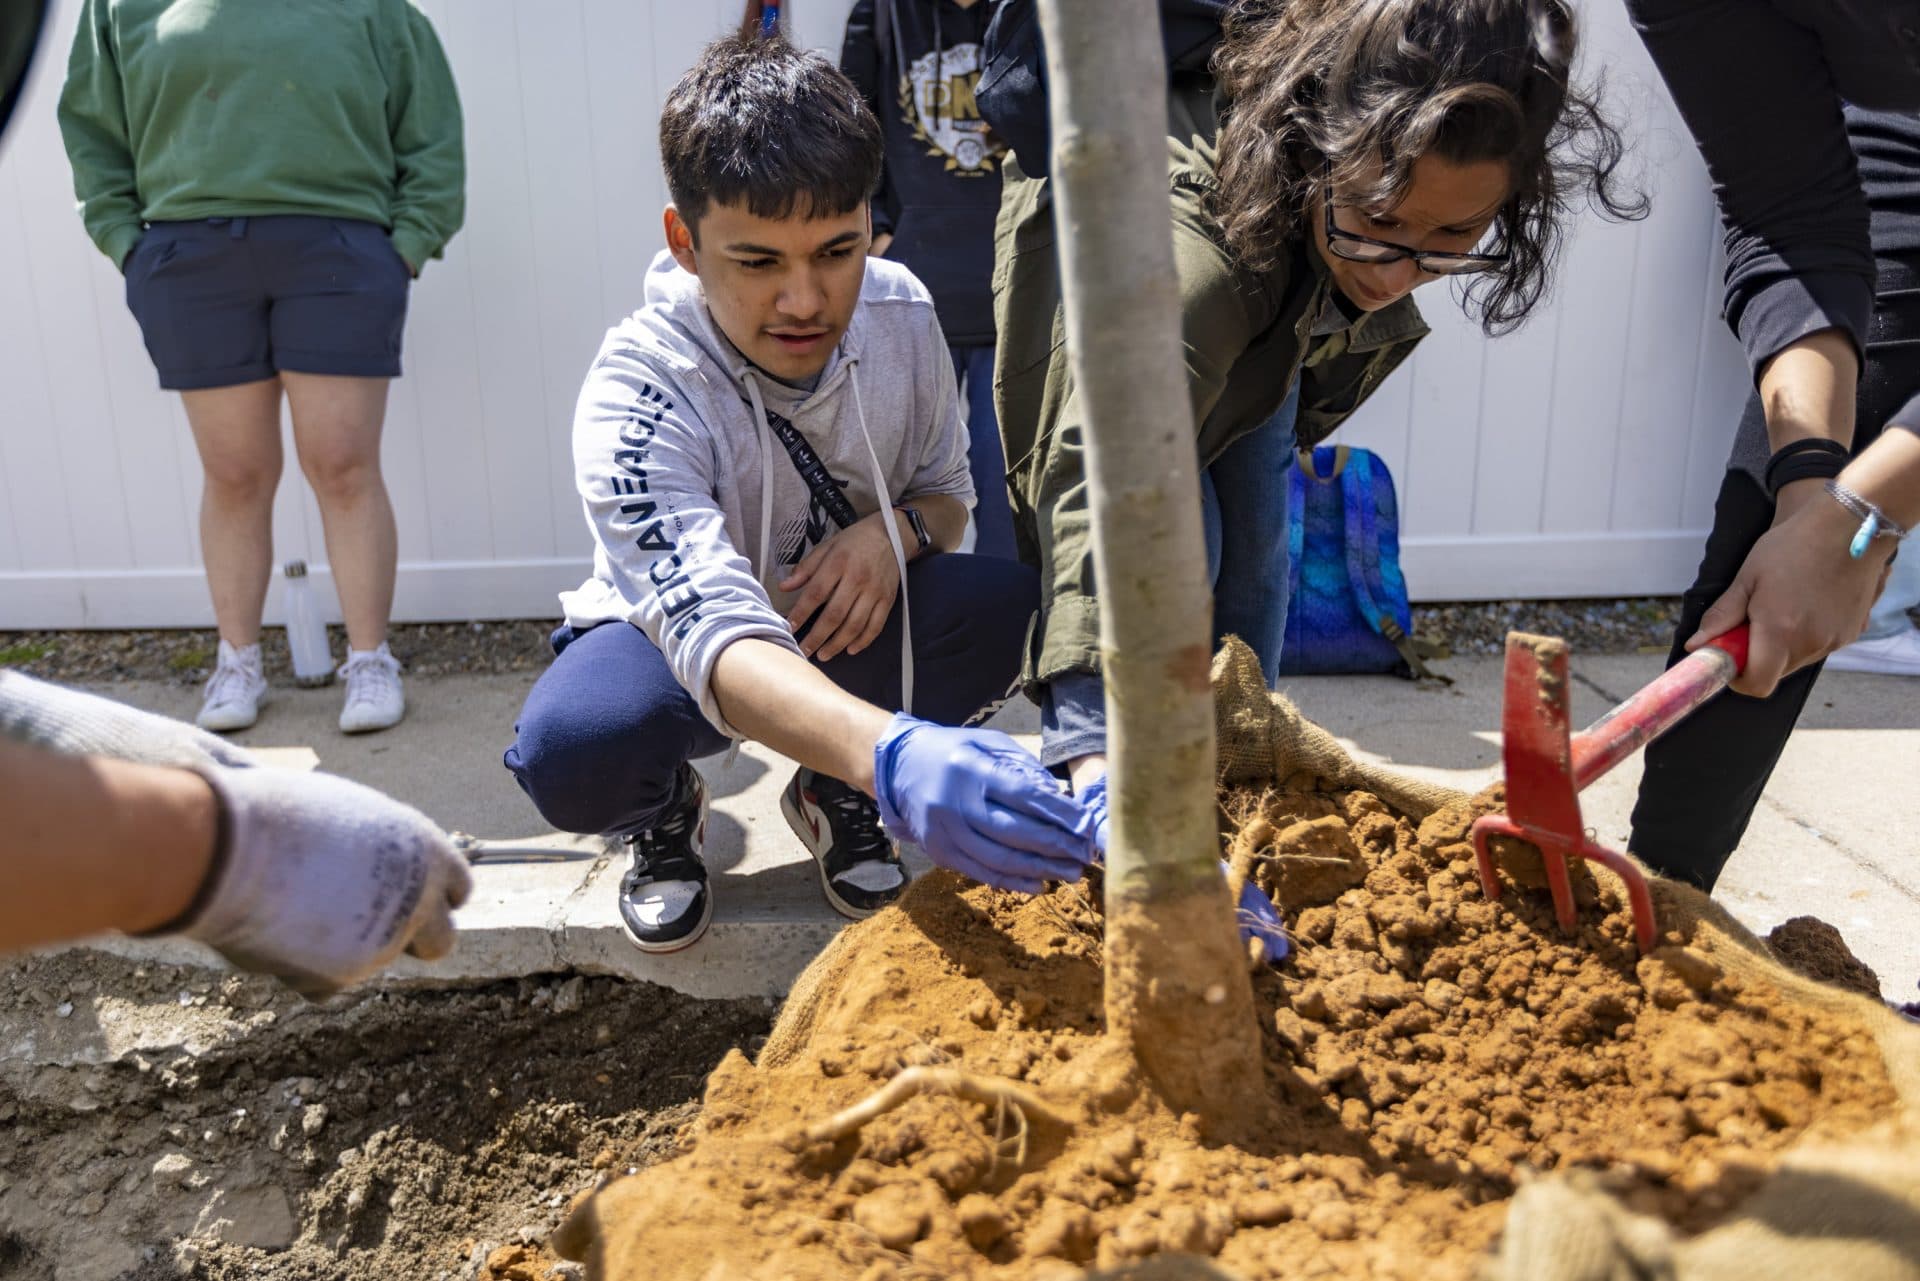 Brian Martinez, 15, and other volunteers from the neighborhood help remove clay from the root ball of a cherry tree as they prepare to plant it on Maverick Street. (Jesse Costa/WBUR)